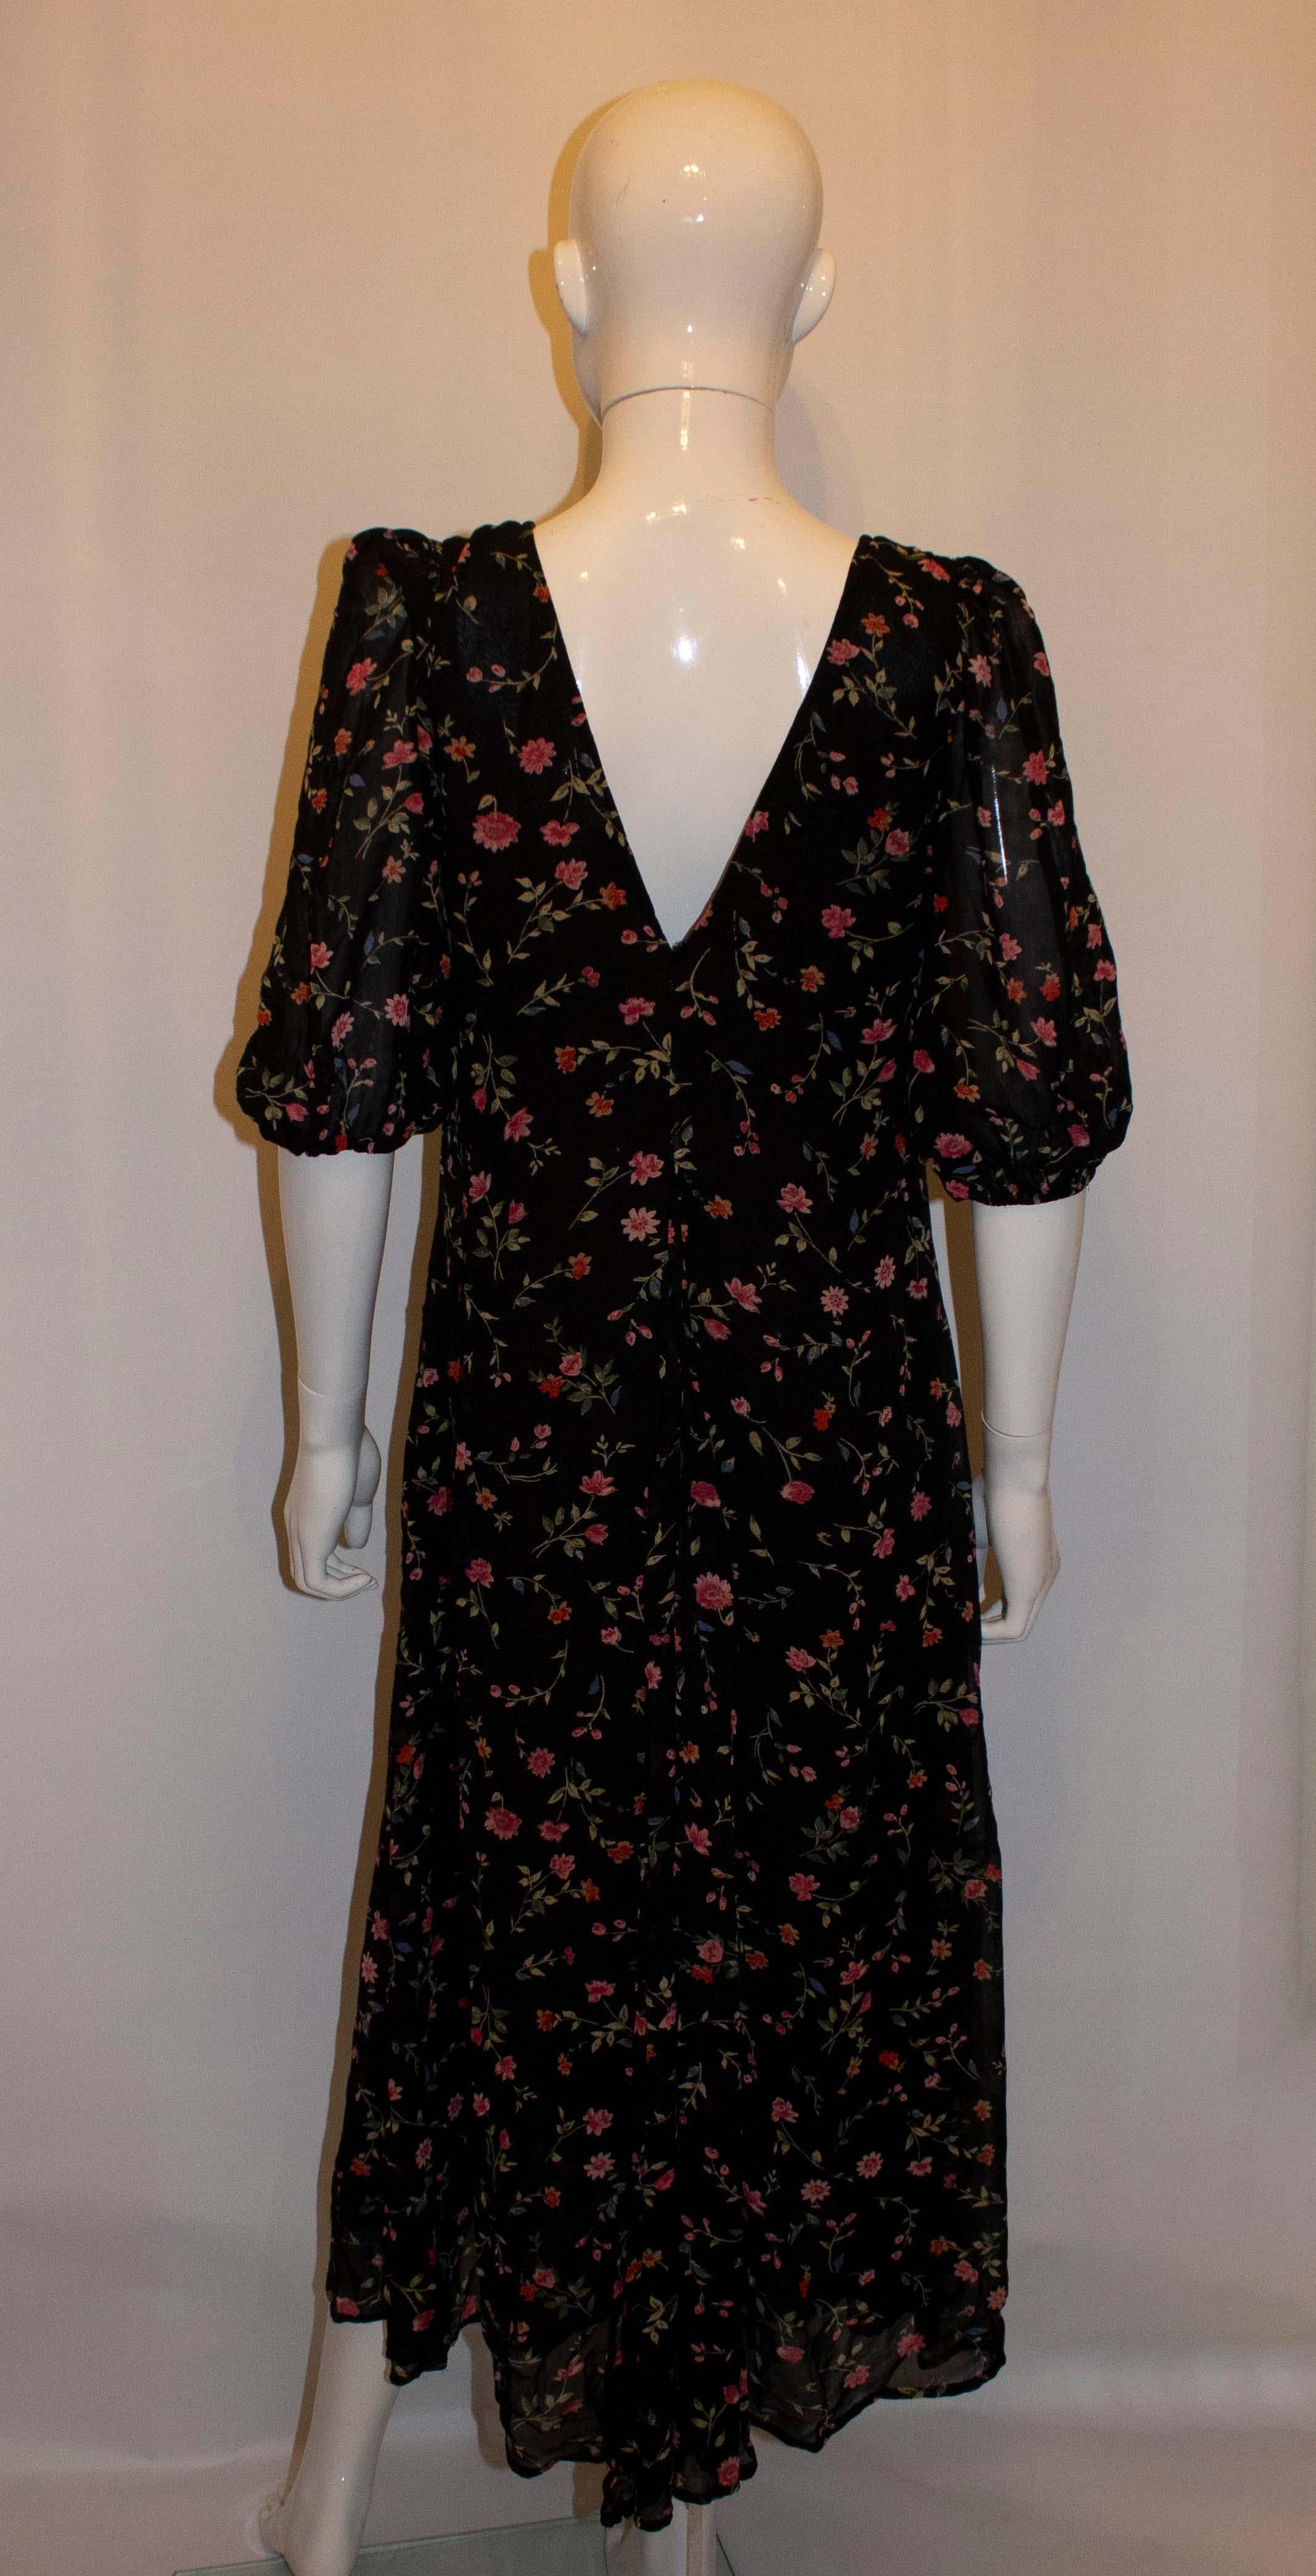 A pretty floral dress by Ganni , great for the party season. The dress has a v neckline , and has a black background with floral print. Size 36, bust 36'',length 50''